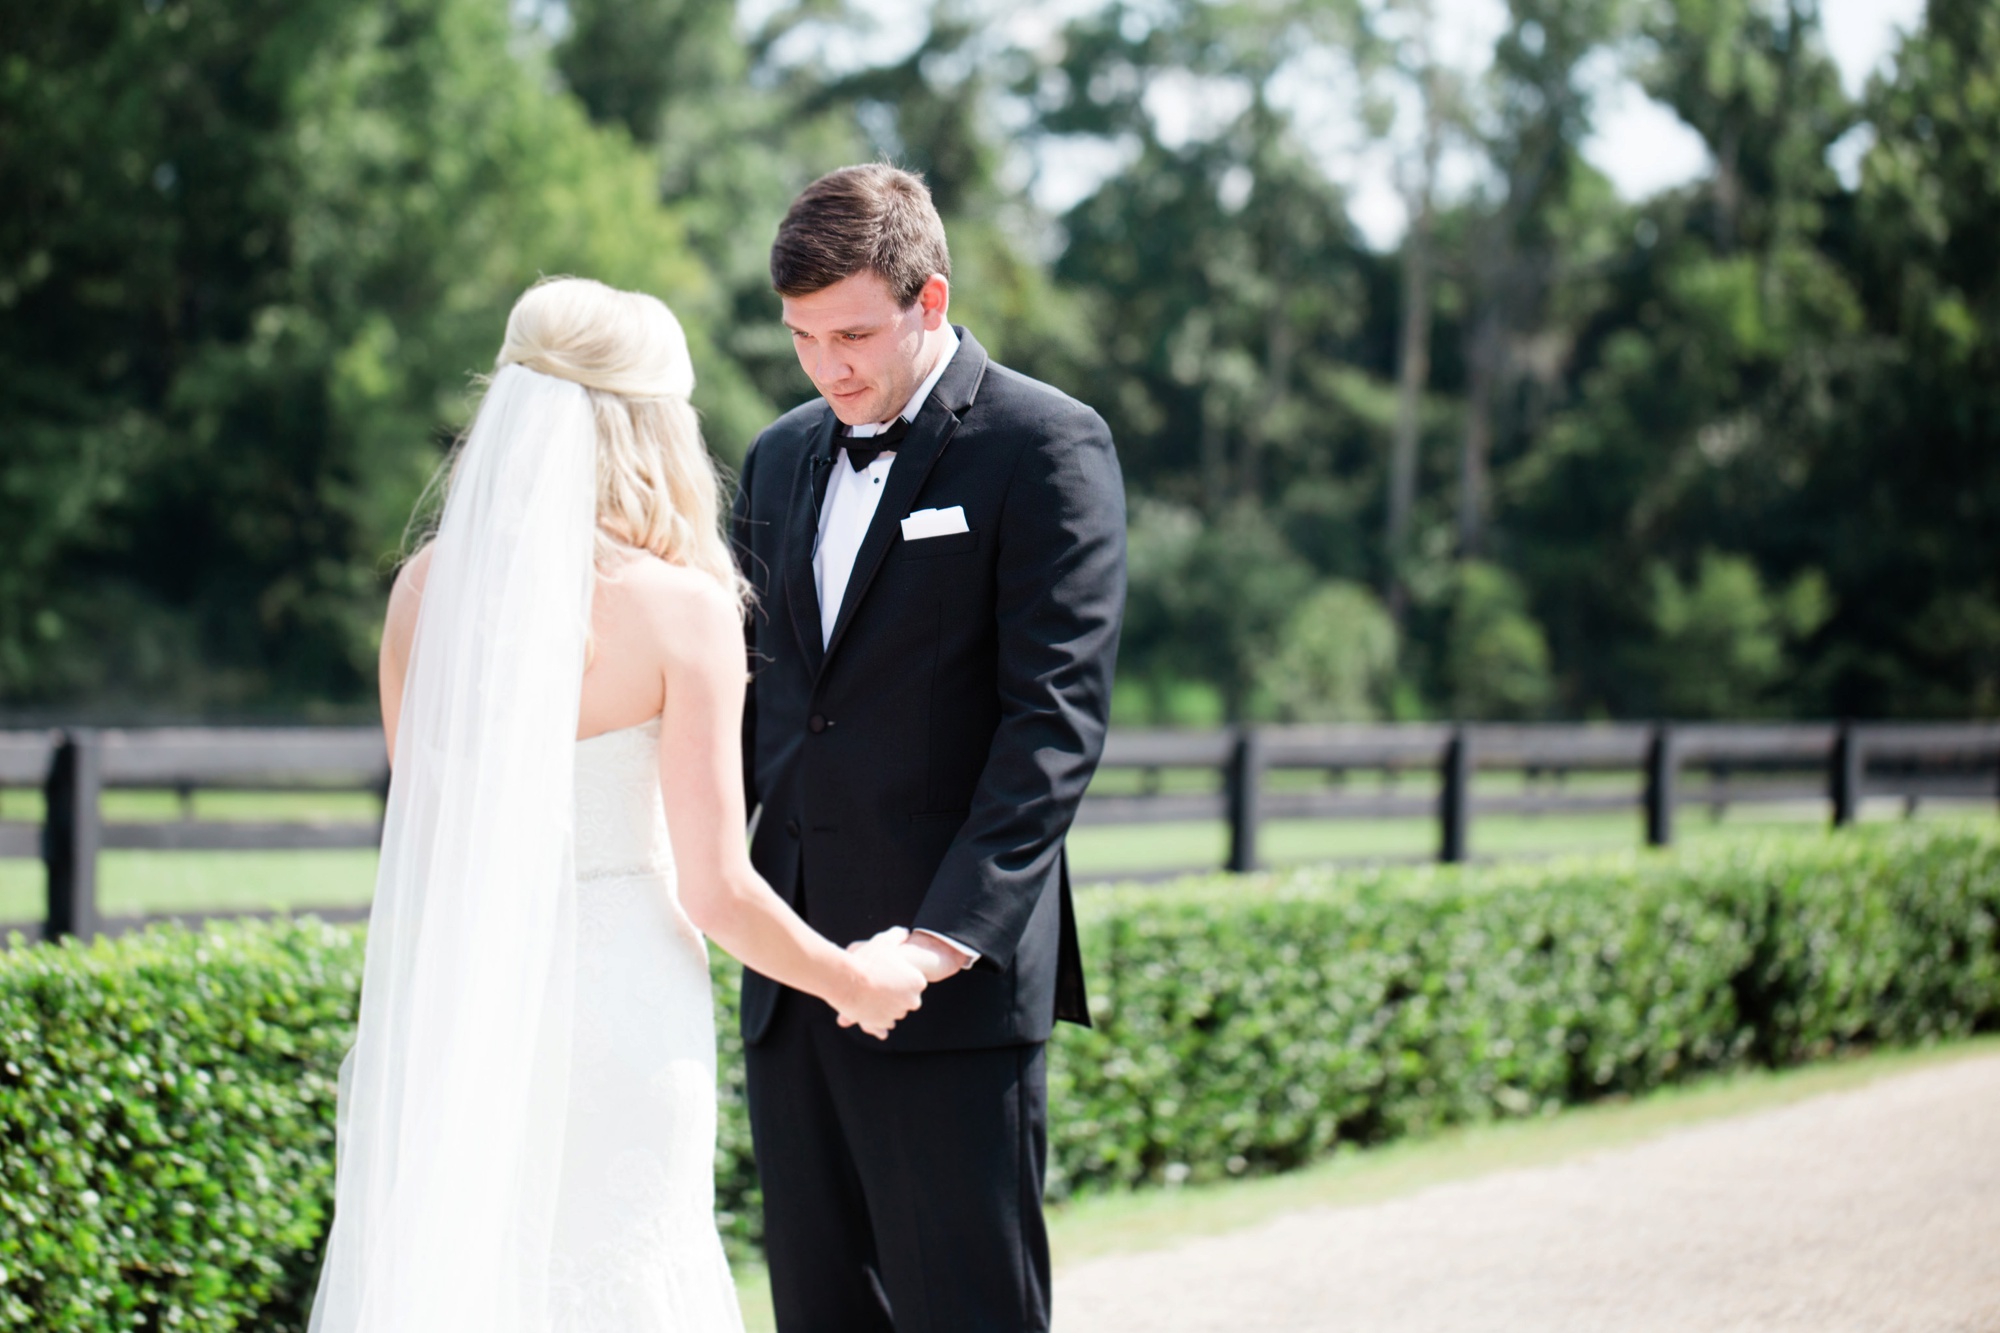 First looks are AMAZING and allow two incredible moments to happen on a wedding day. It's crazy how many times grooms cry during a first look. Photo by Luxury destination photographer Rebecca Cerasani.